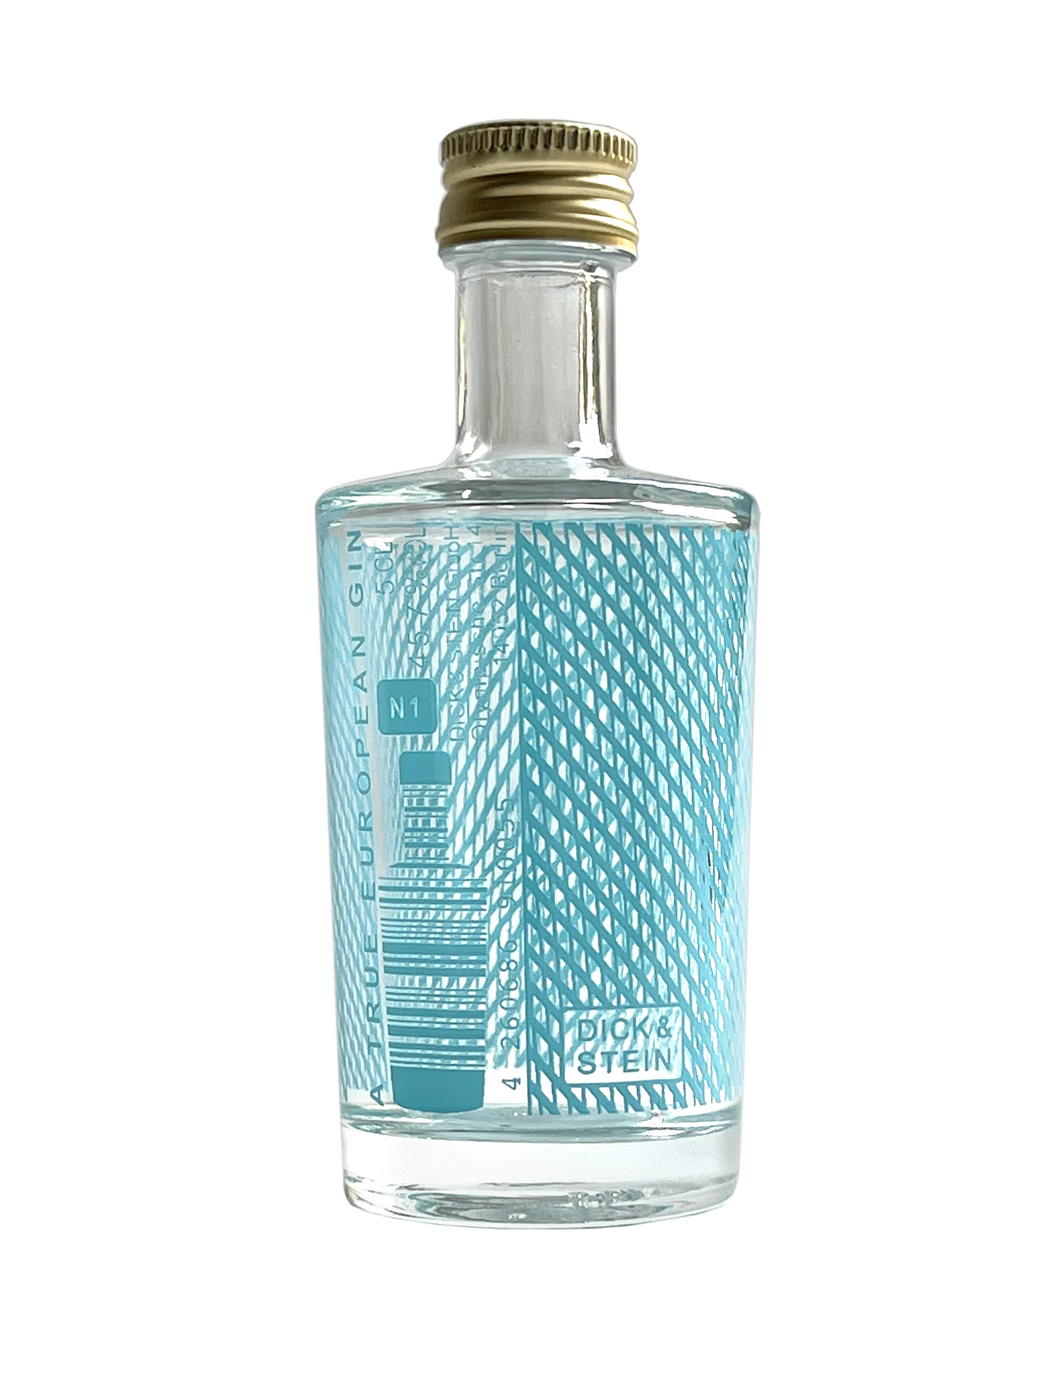 DICK & STEIN GIN - unfiltered london dry gin - 45,7% vol. - 5cl